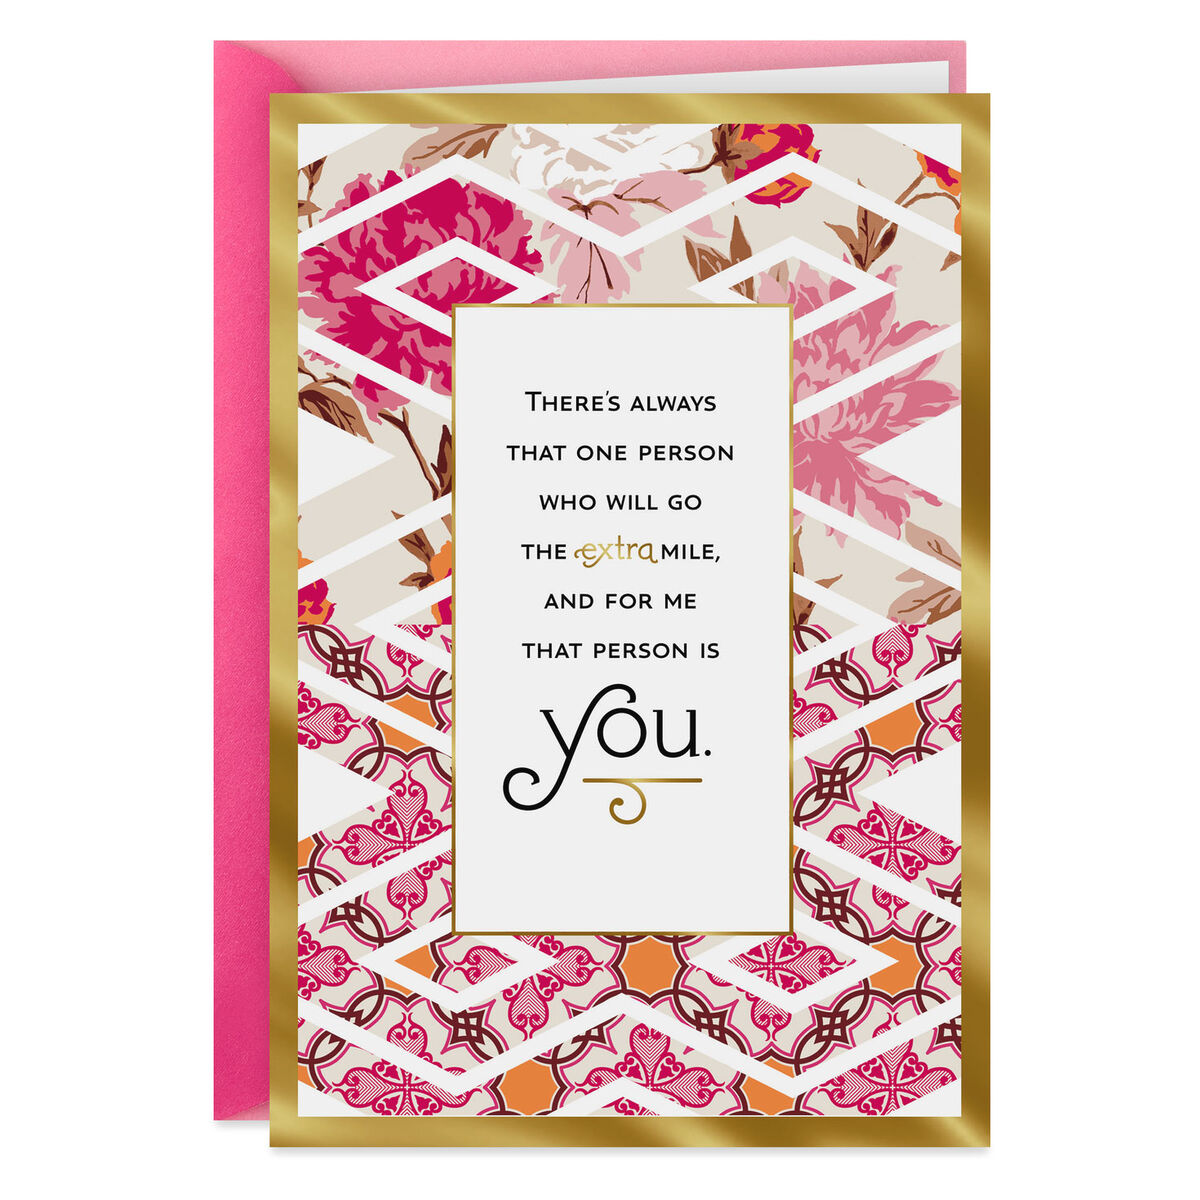 thank-you-messages-what-to-write-in-a-thank-you-card-hallmark-zohal